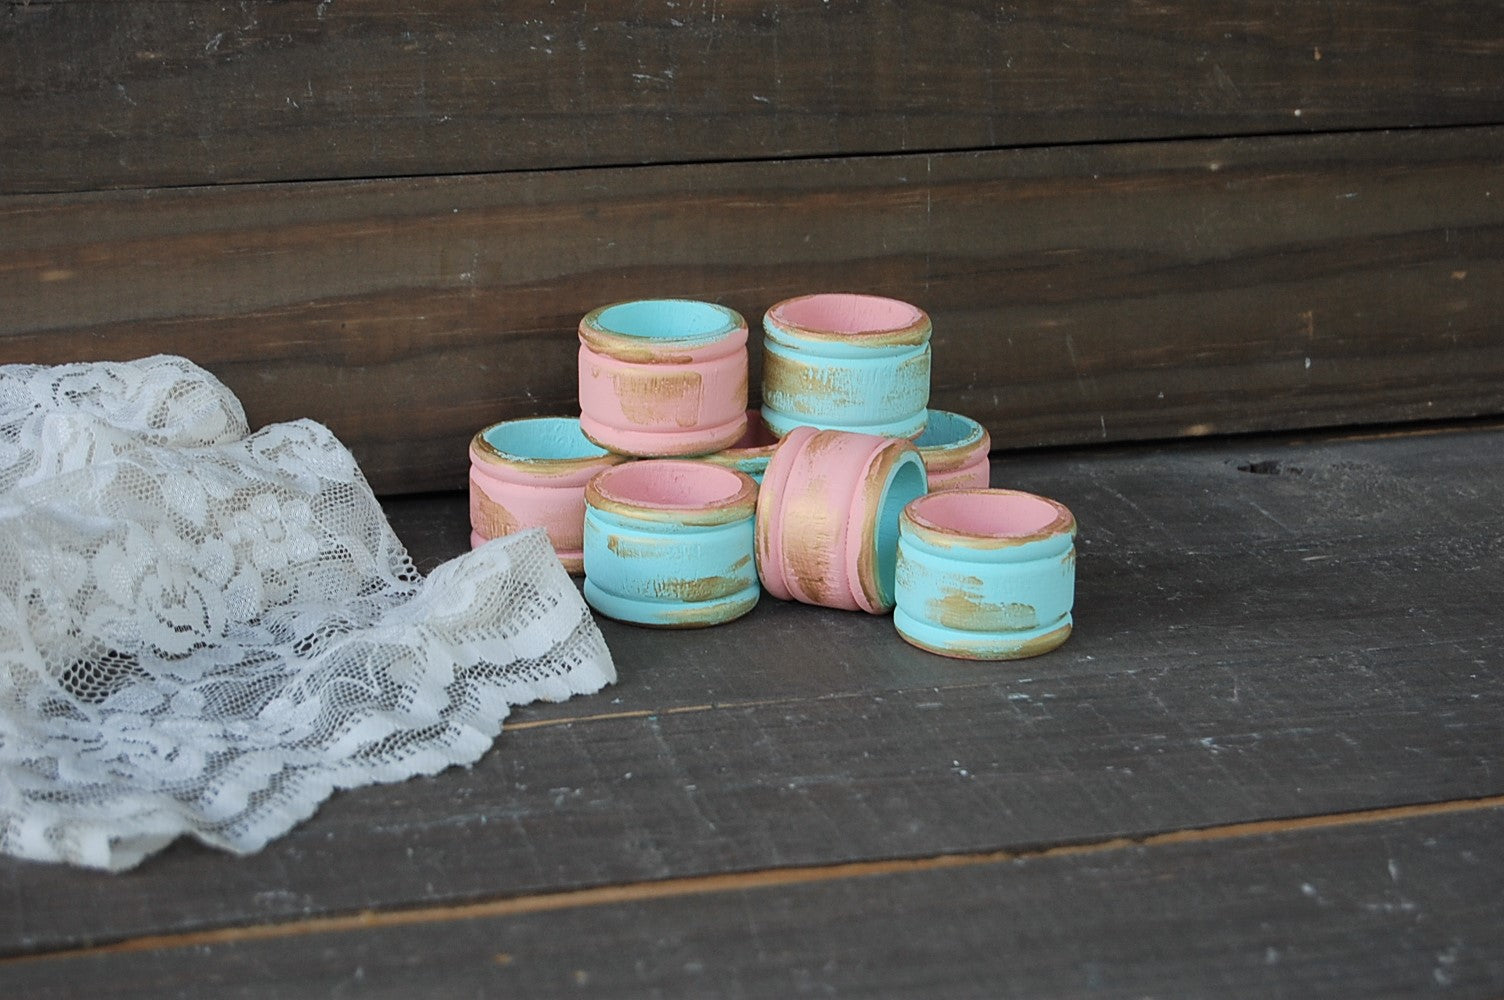 Mint & peach napkin rings - The Vintage Artistry